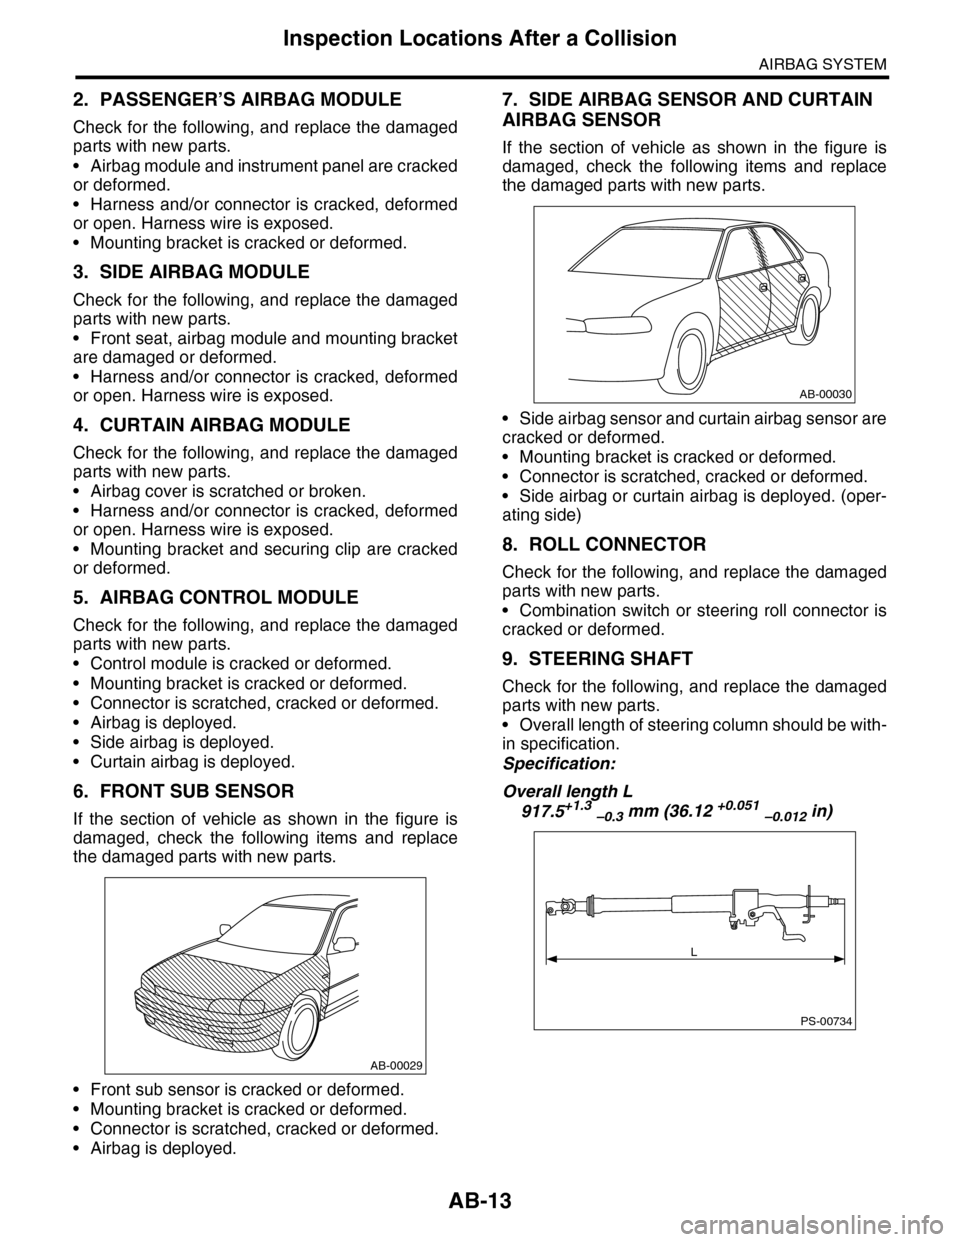 SUBARU TRIBECA 2009 1.G Service Workshop Manual AB-13
Inspection Locations After a Collision
AIRBAG SYSTEM
2. PASSENGER’S AIRBAG MODULE
Check for the following, and replace the damaged
parts with new parts.
•Airbag module and instrument panel a